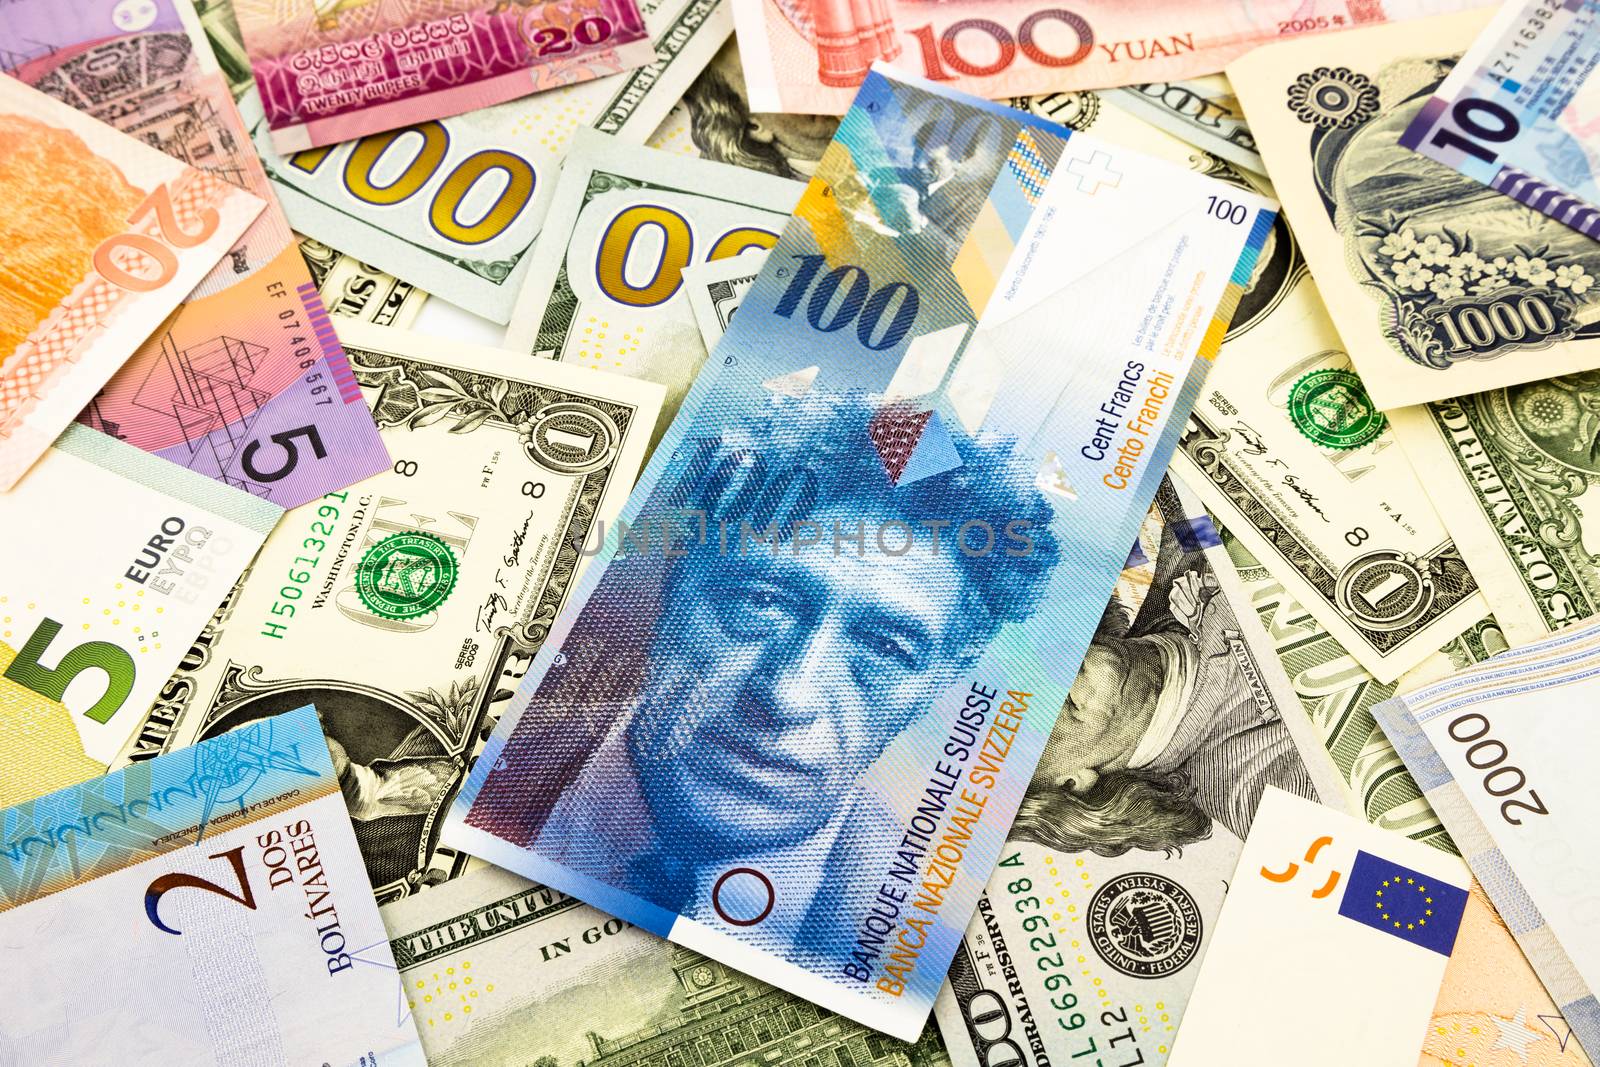 swiss and world currency money banknote by vinnstock